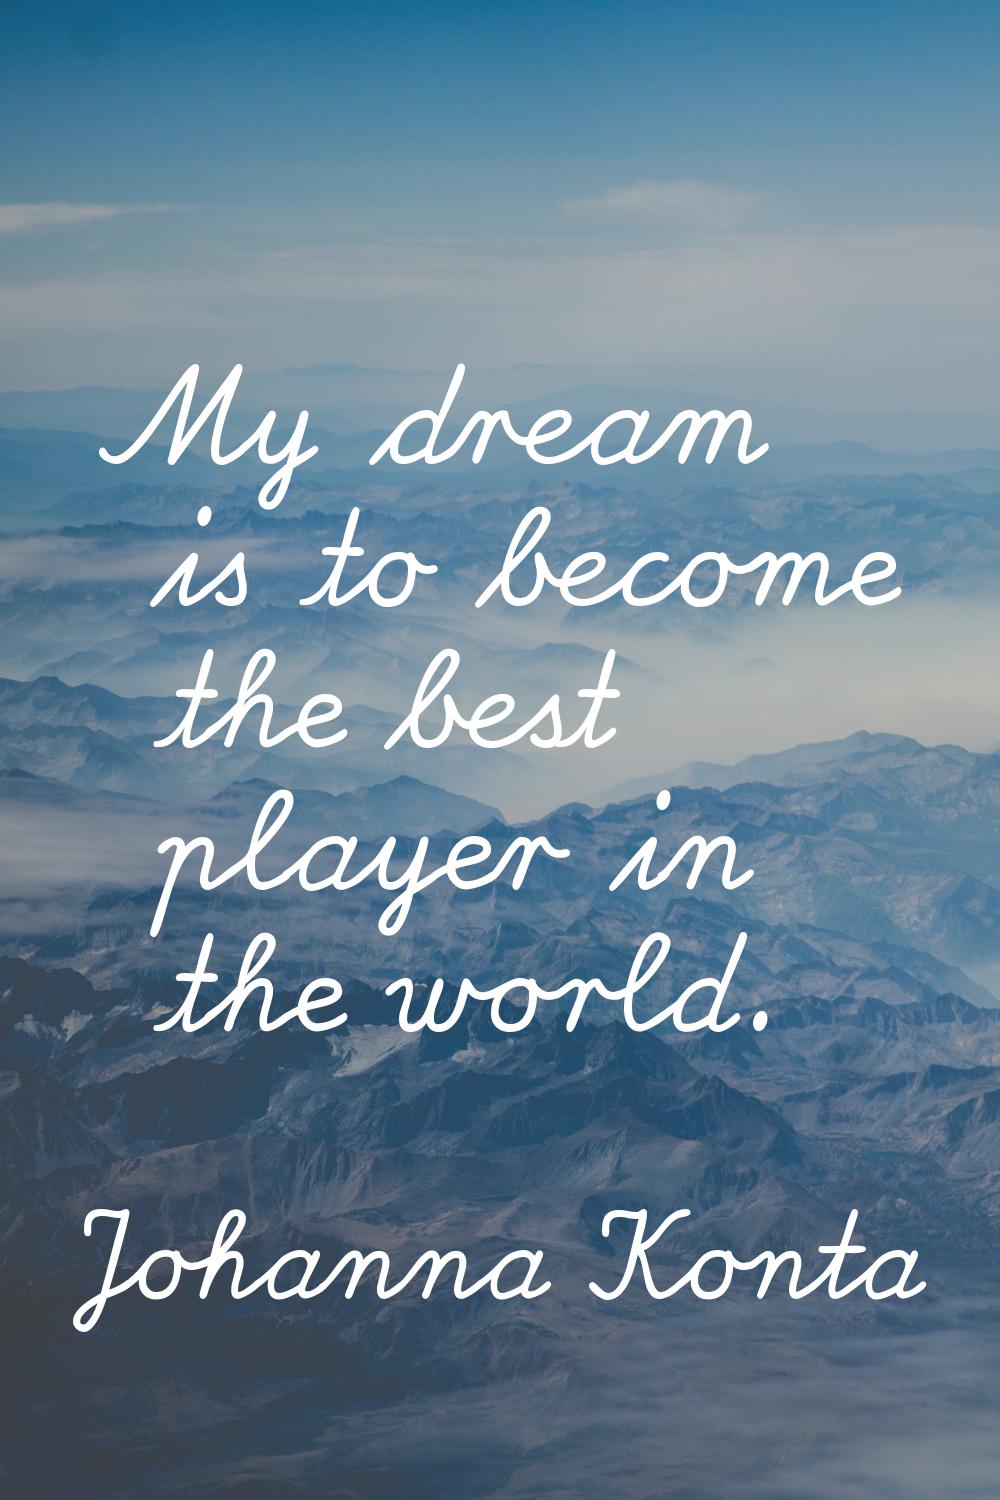 My dream is to become the best player in the world.